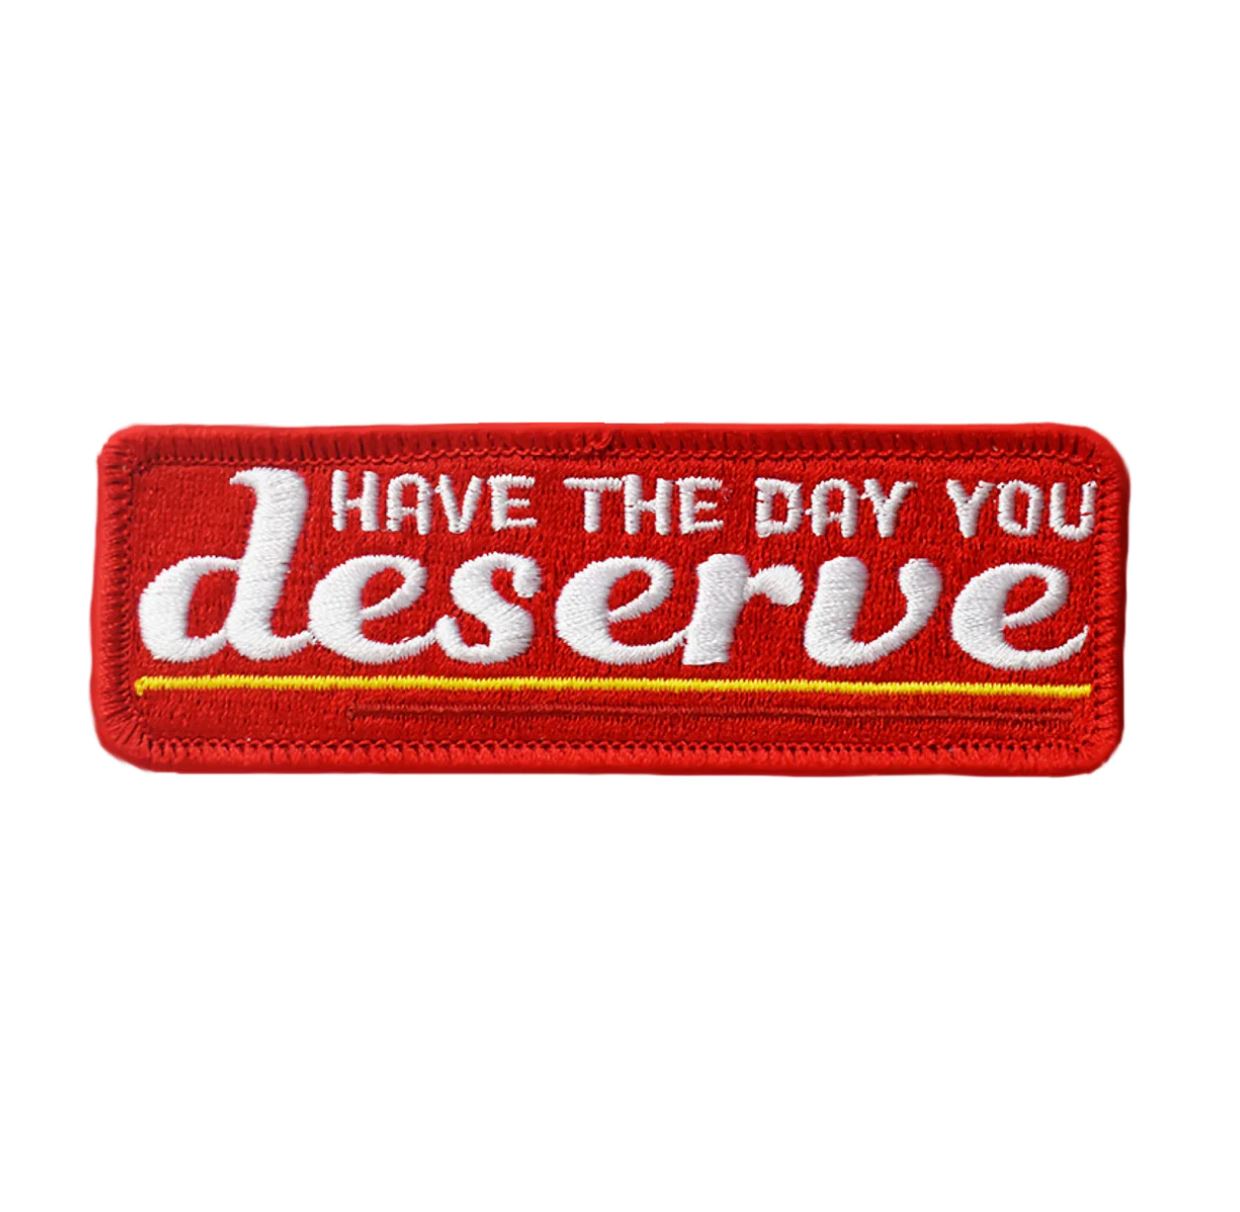 Day You Deserve Embroidered Patch x Retrograde Supply Co. - Third Drawer Down